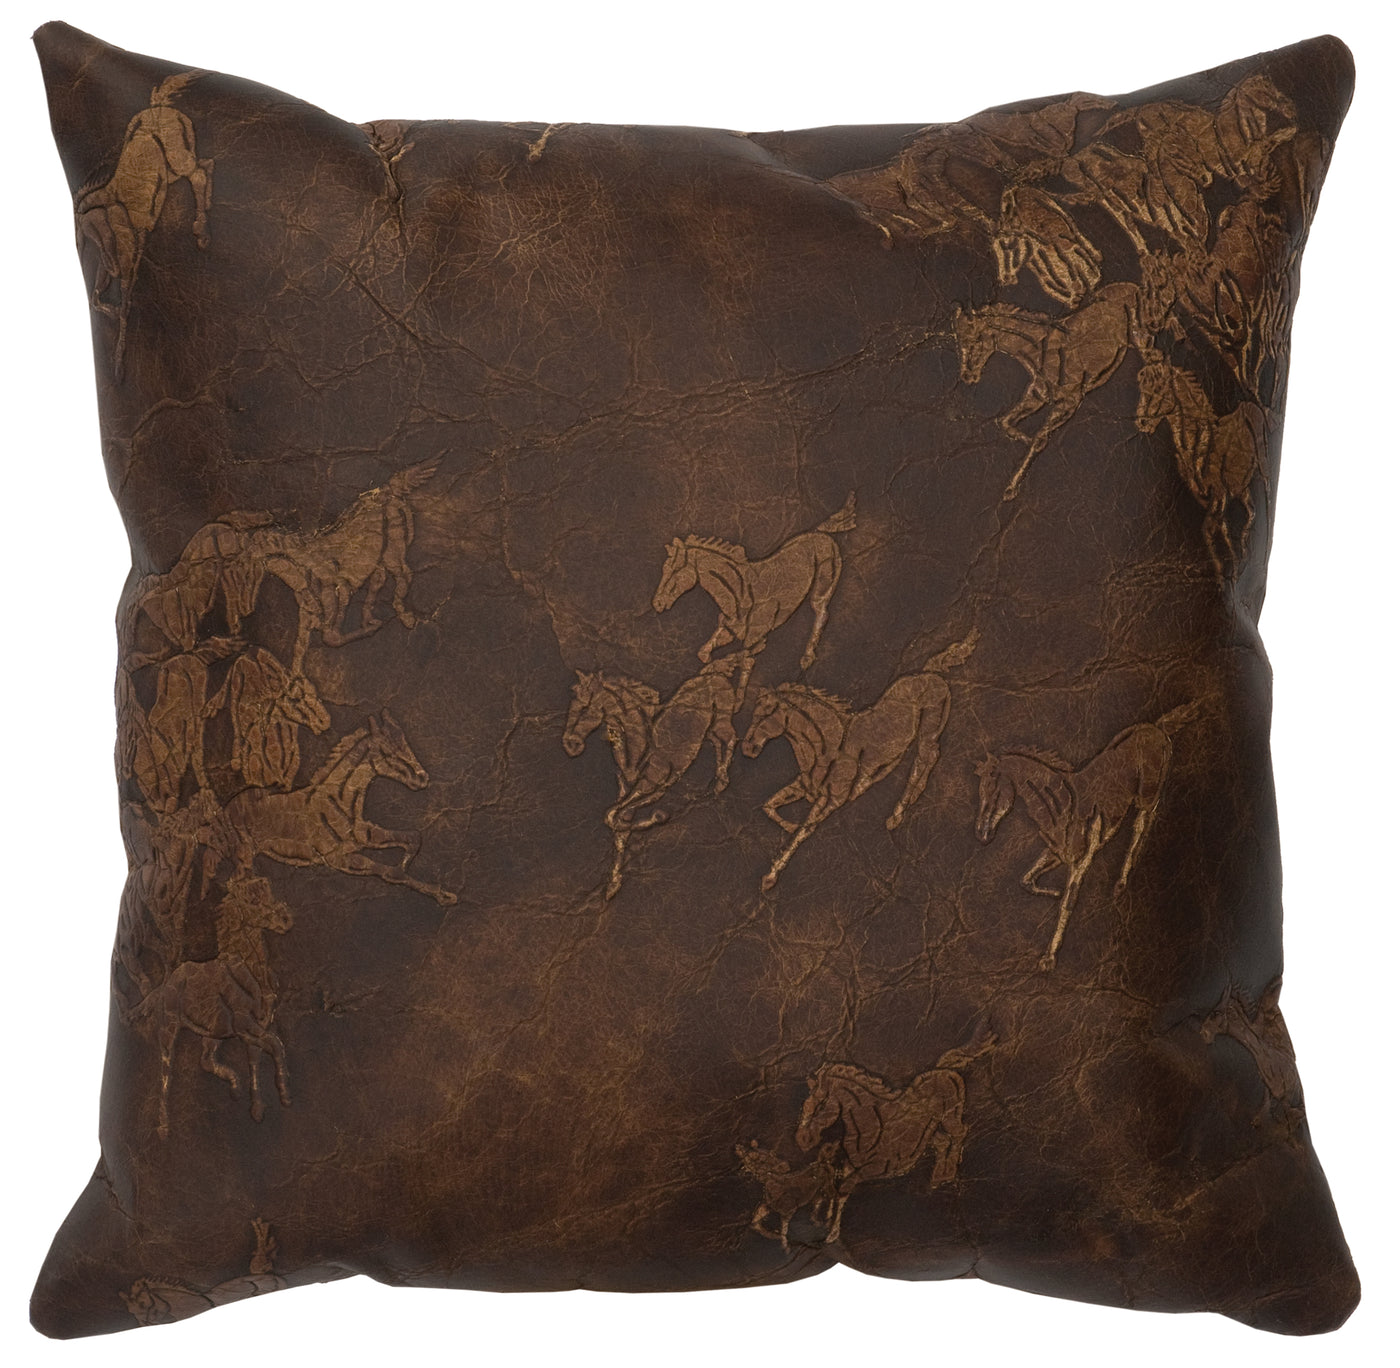 Canvello Settler Leather Pillow - Fabric Back - 16" x 16"